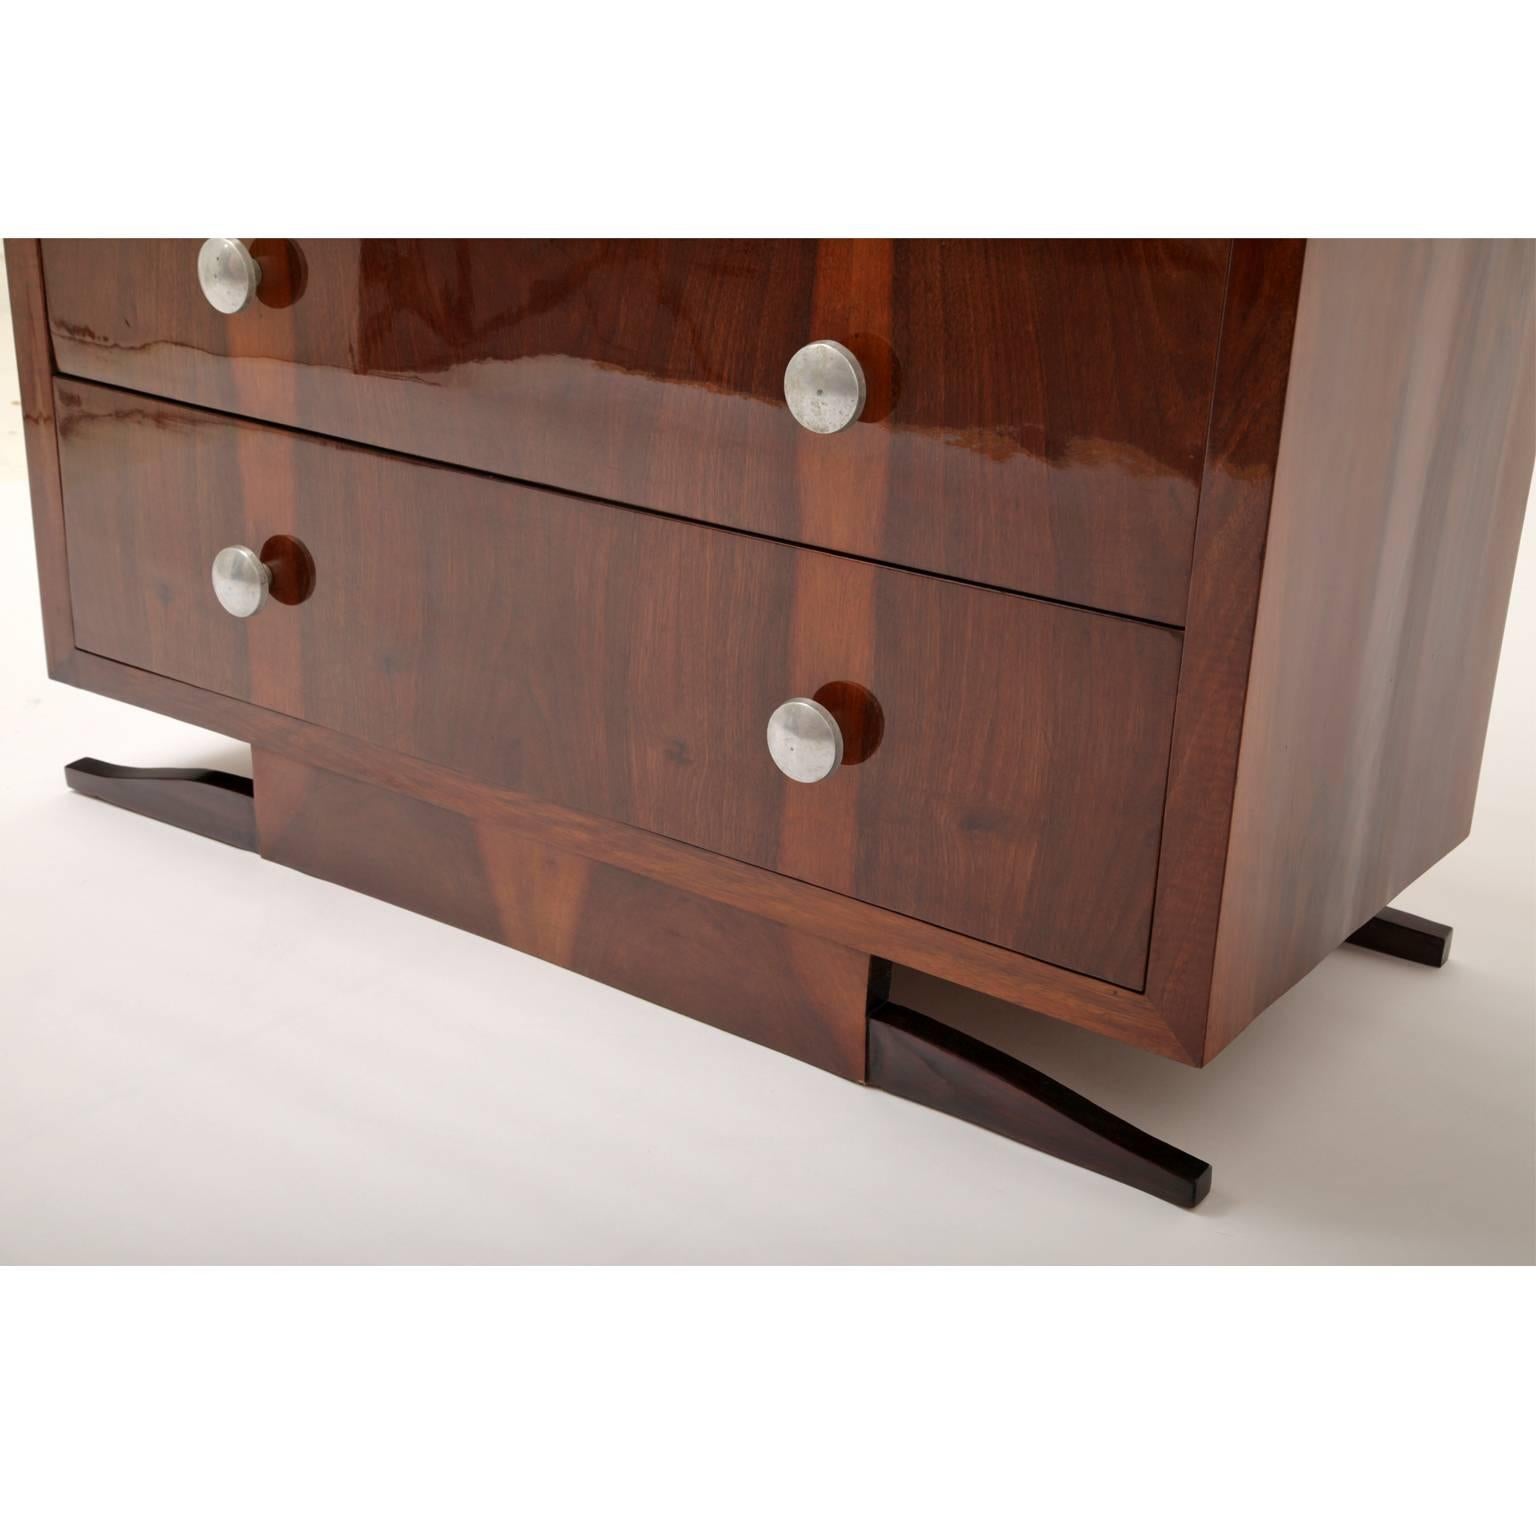 Art Deco chest of drawers with a straight body and round, silver handles.